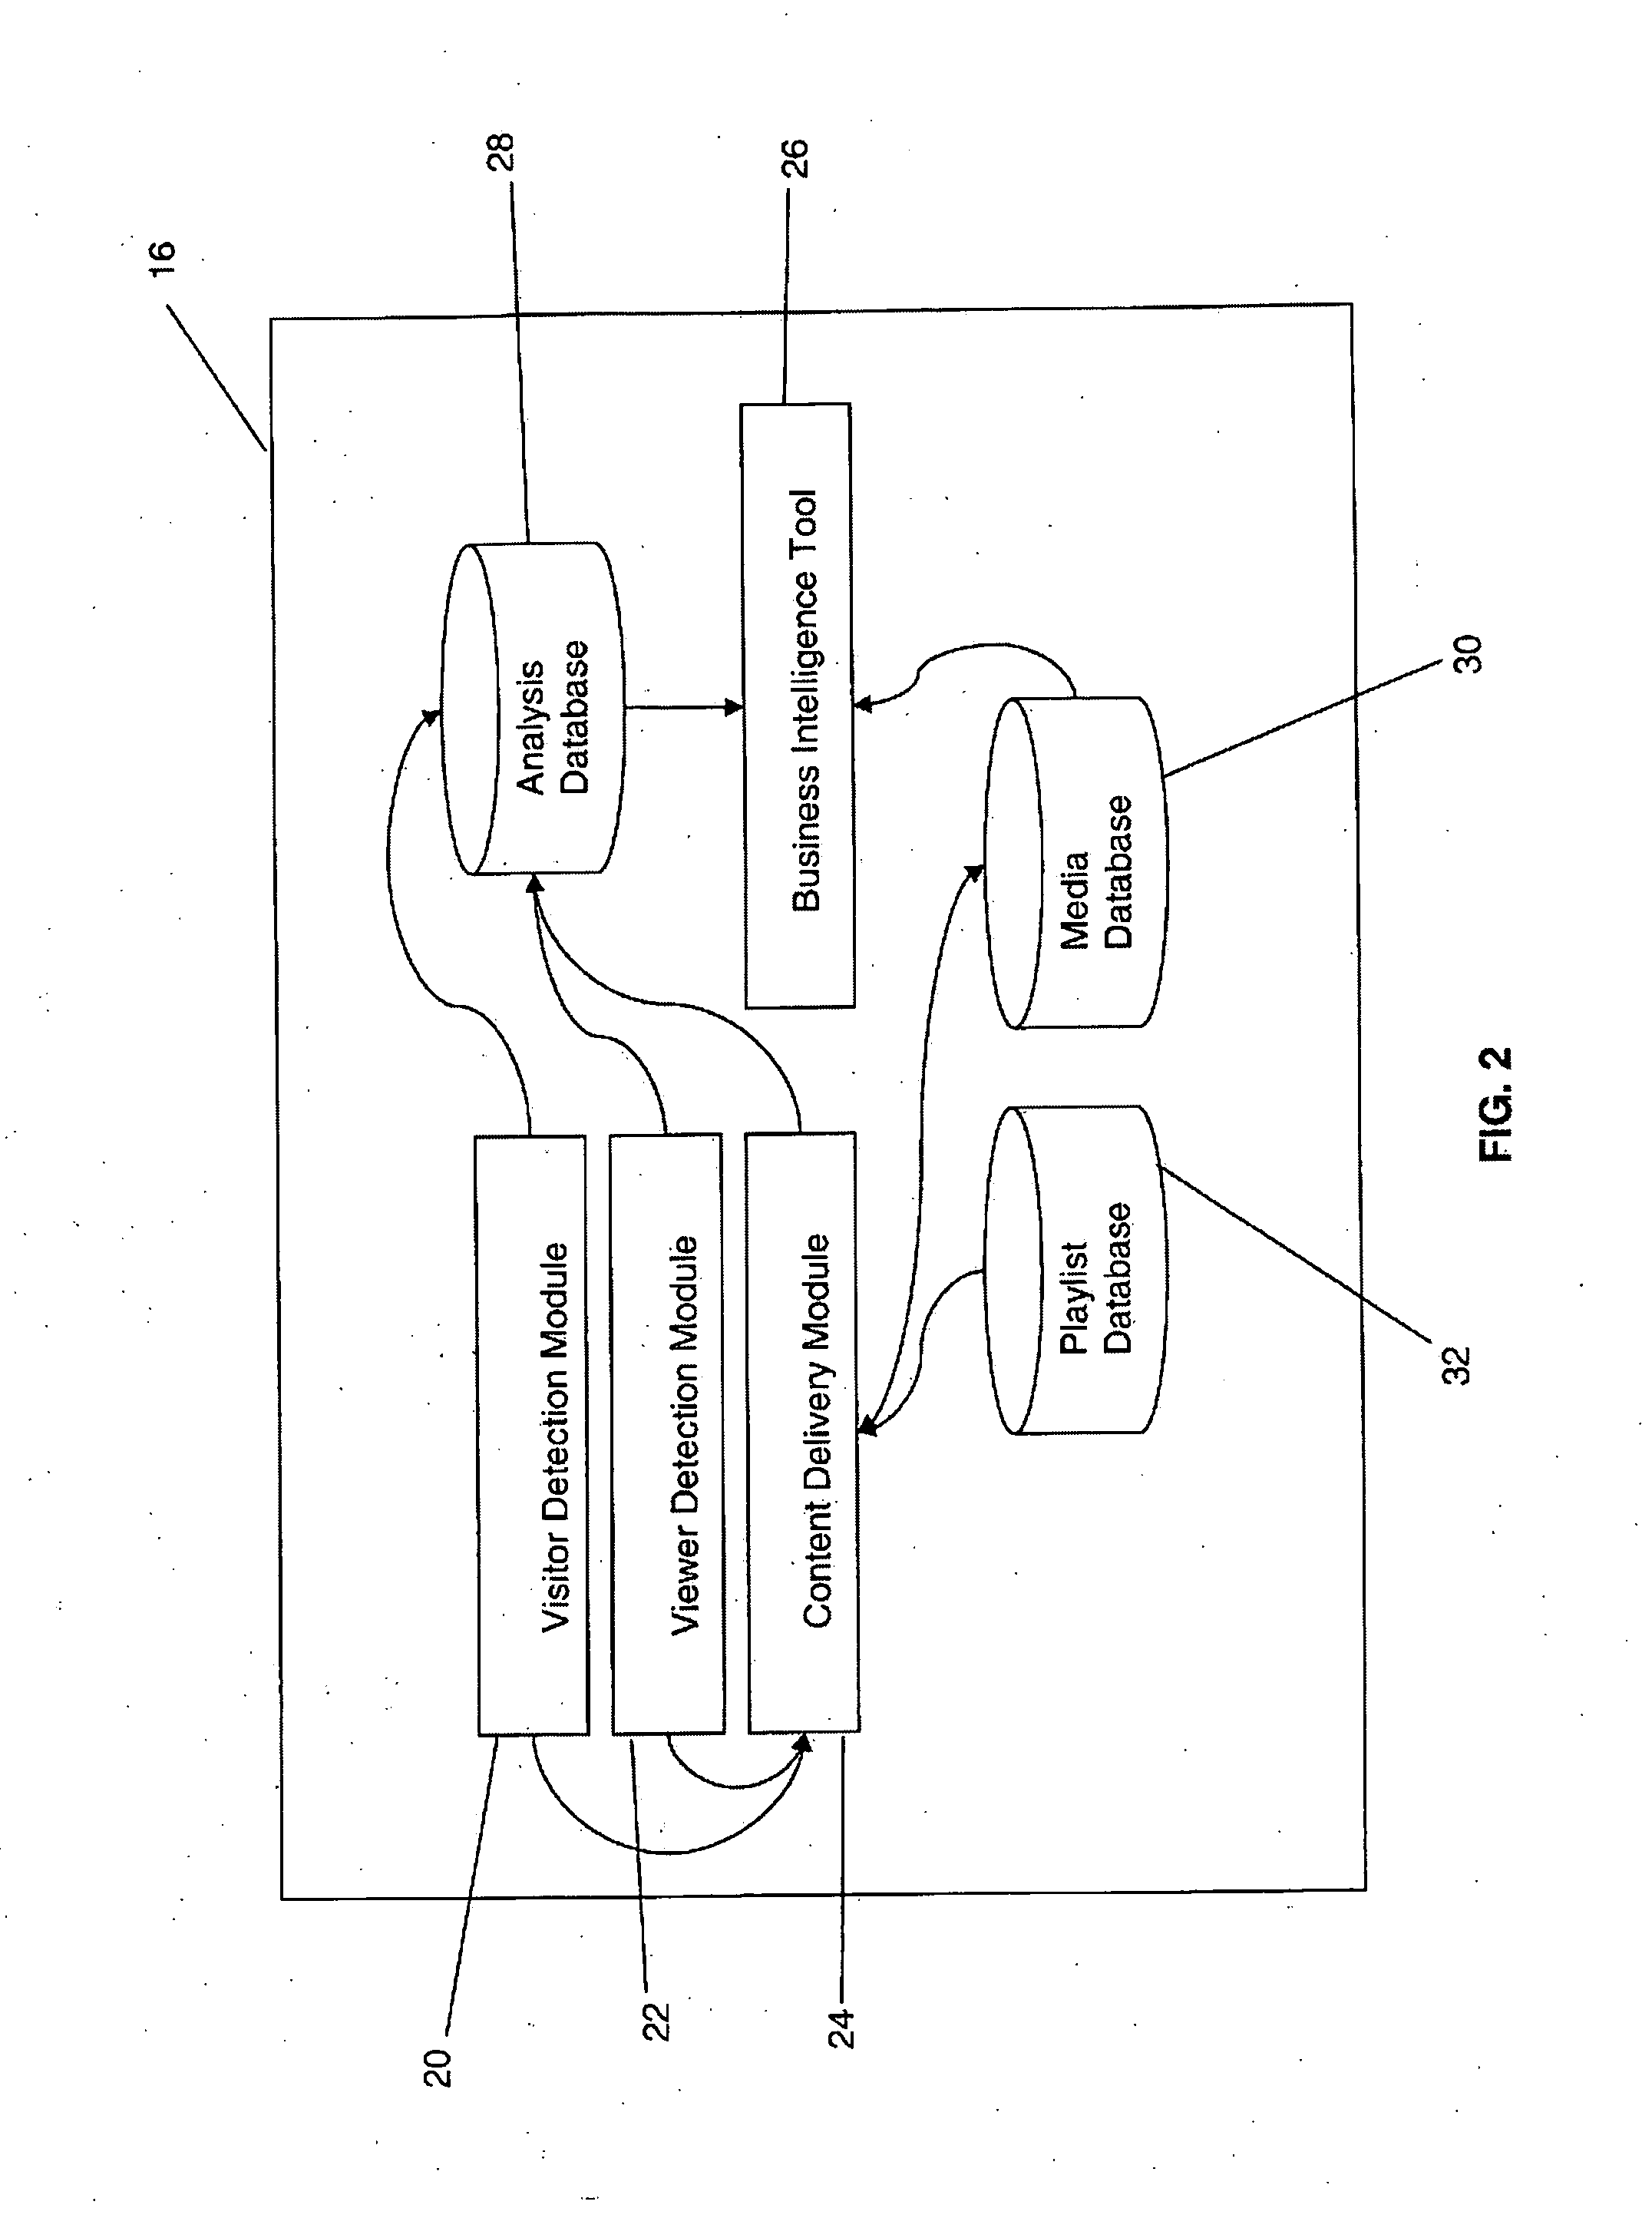 Method and system for audience measurement and targeting media